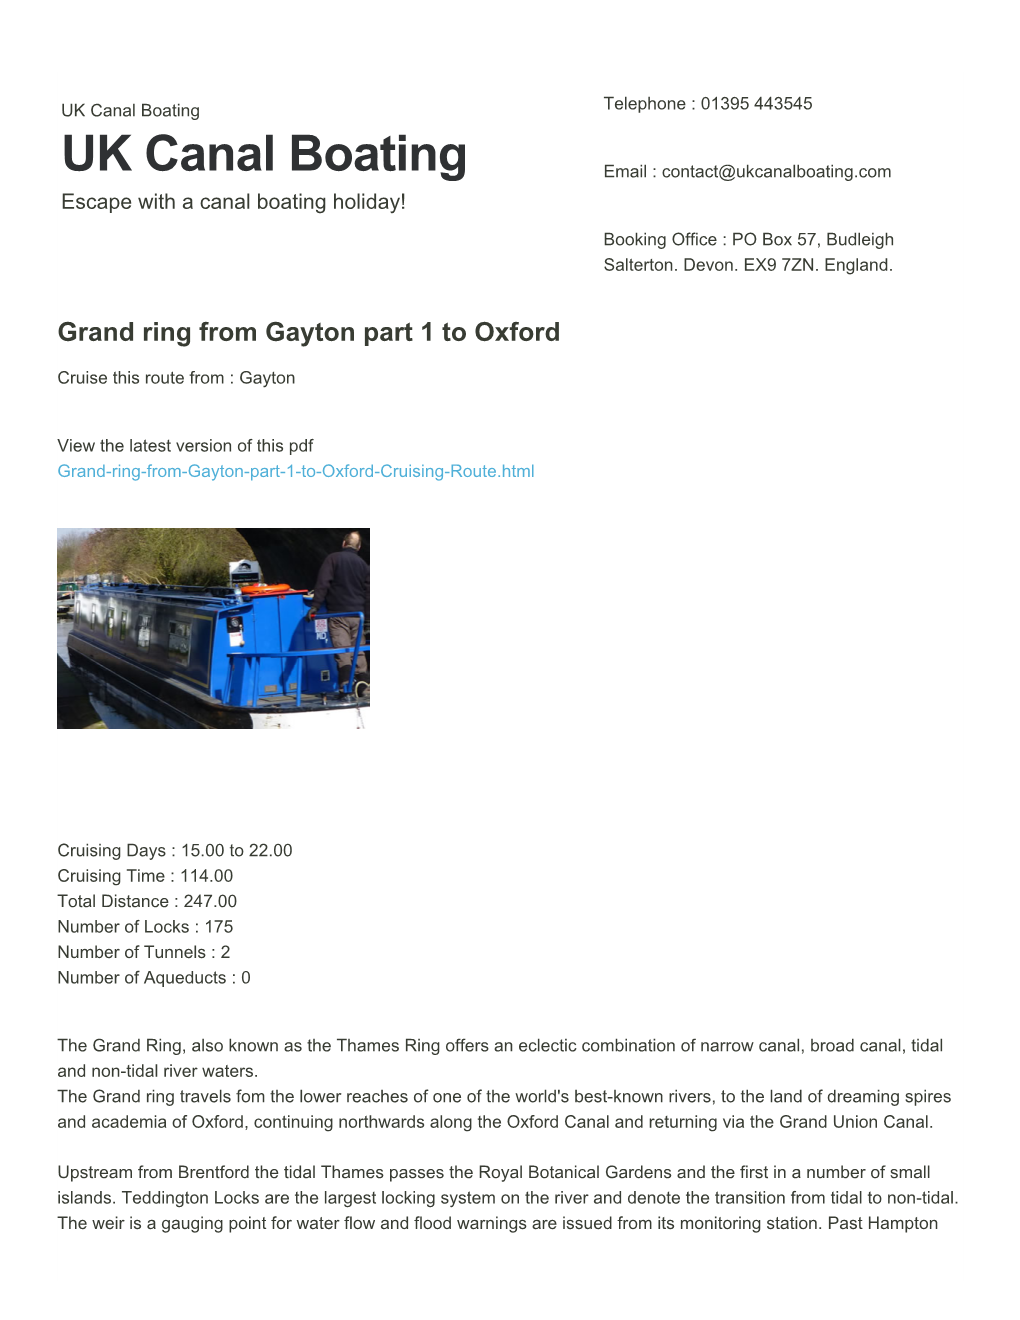 Grand Ring from Gayton Part 1 to Oxford | UK Canal Boating